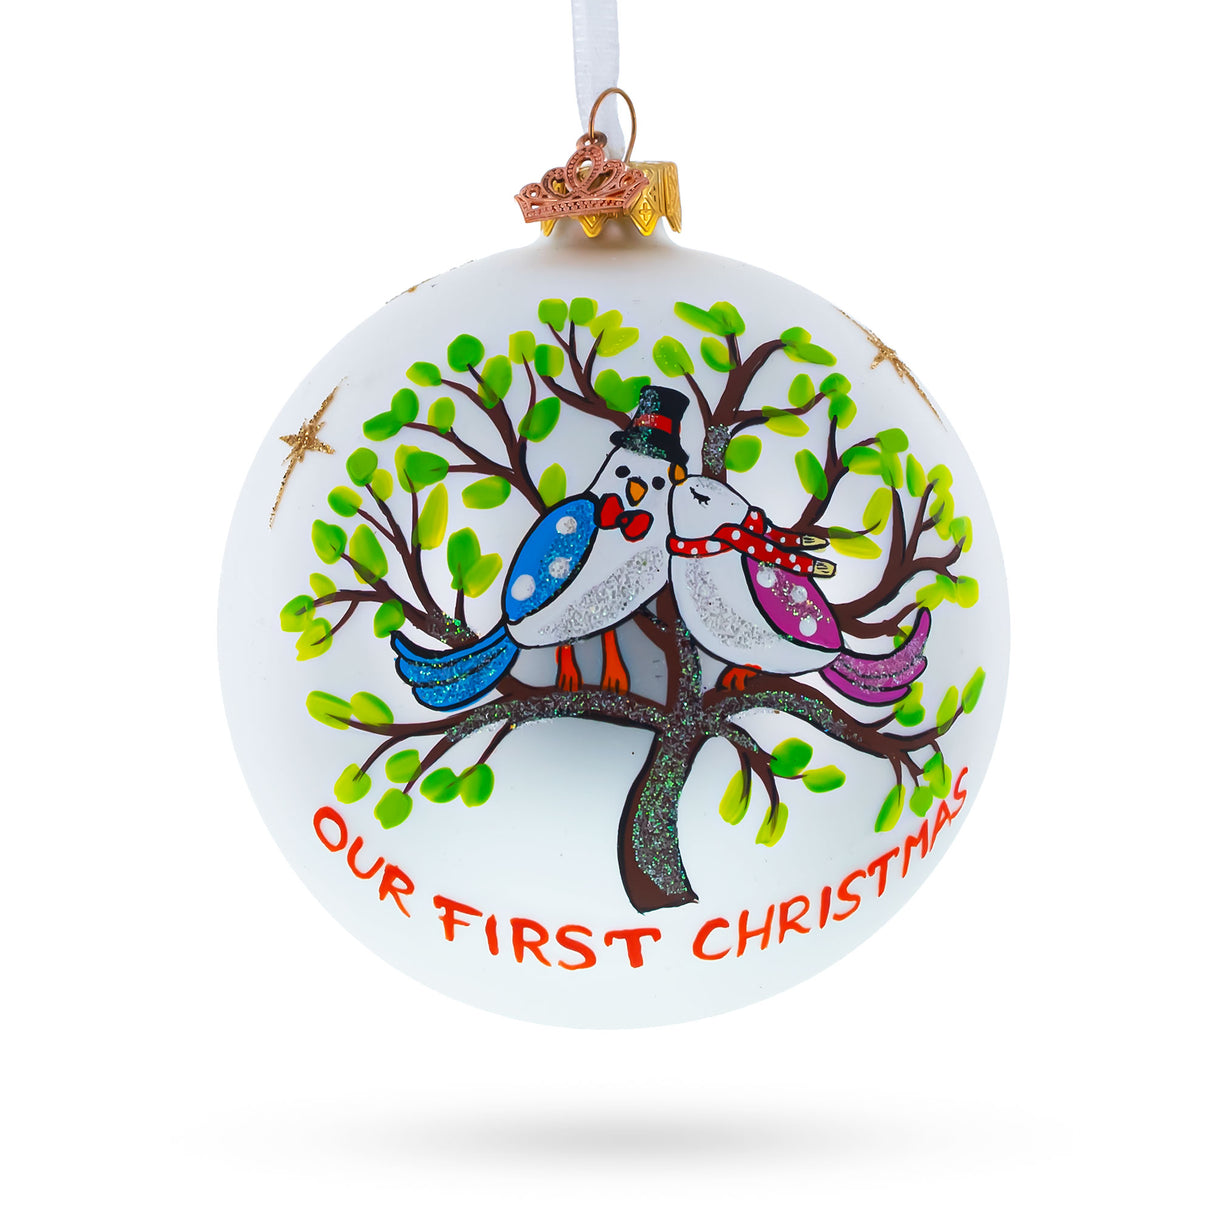 Lovebirds Perched on a Tree Blown Glass Ball 'Our First Christmas' Ornament 4 Inches in White color, Round shape